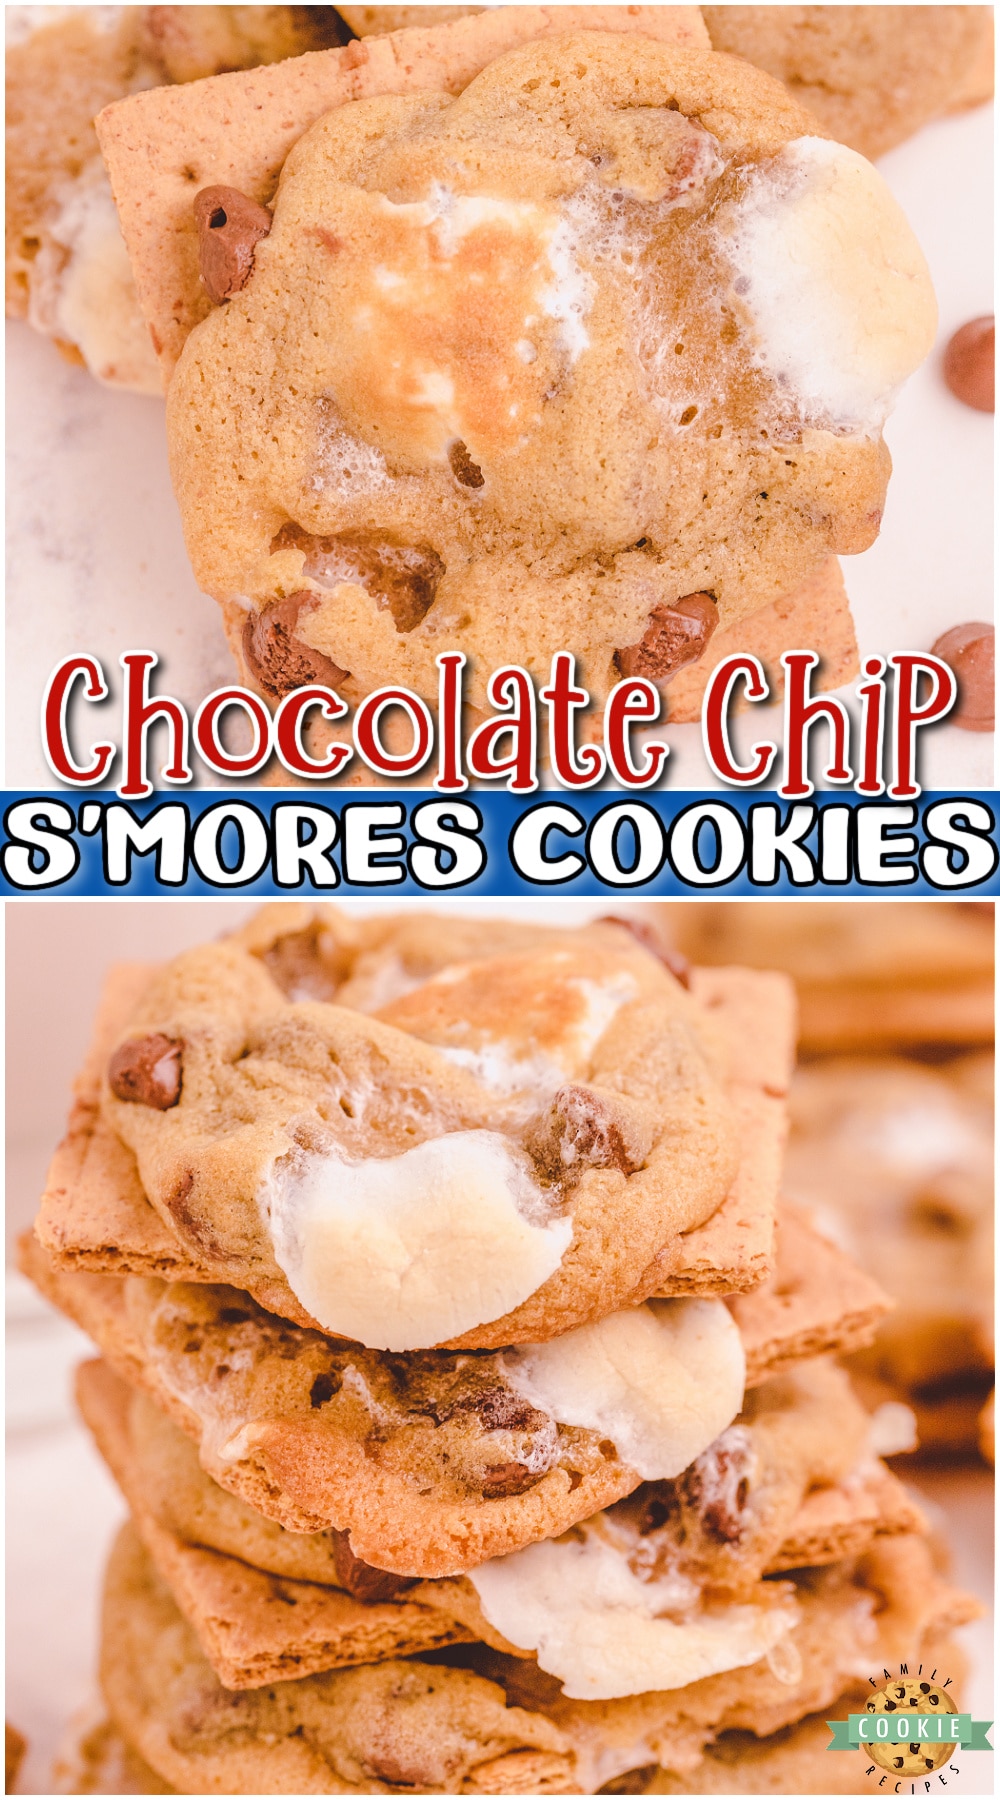 Chocolate Chip S’mores Cookies are soft, chewy chocolate chip cookies baked atop a graham cracker, then topped with chocolate chips & marshmallows!